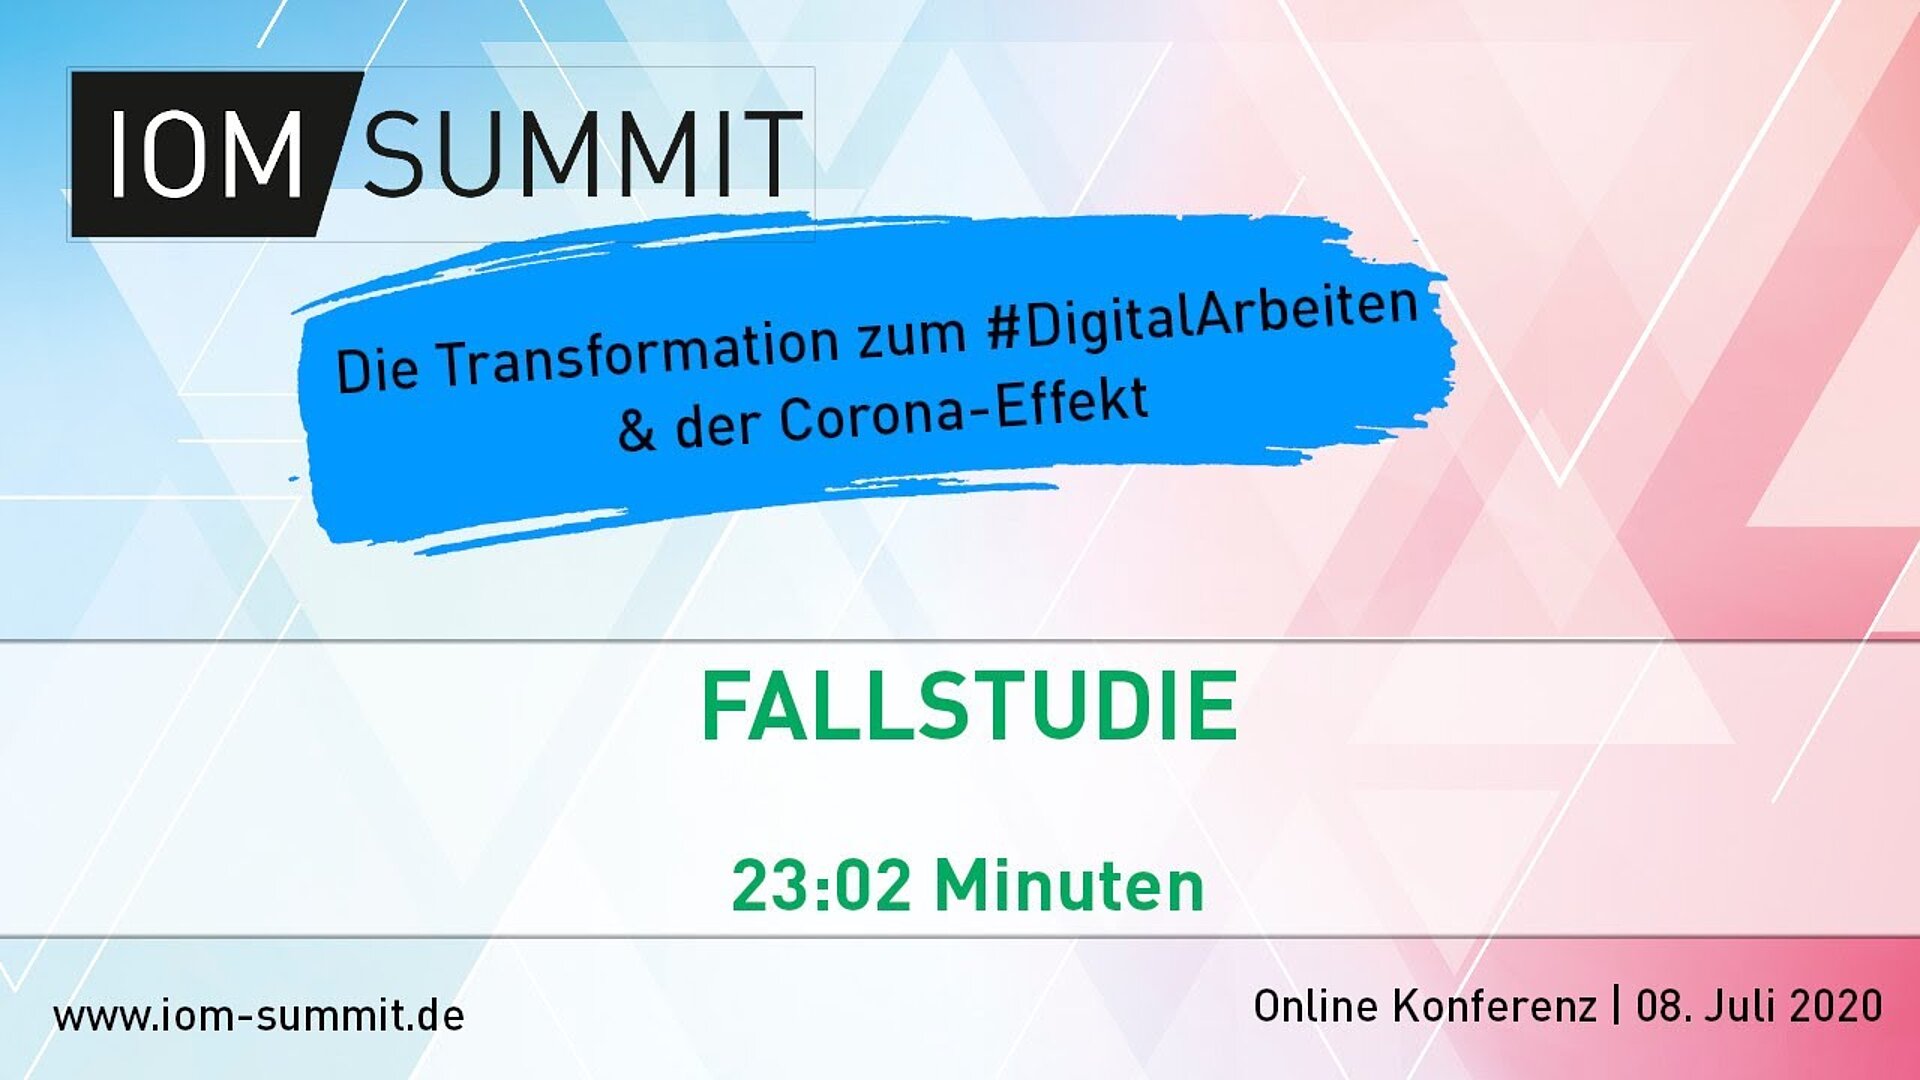 Fallstudie: From the Myth About The All-In-One Intranet Future to the New Normal of Digital Work